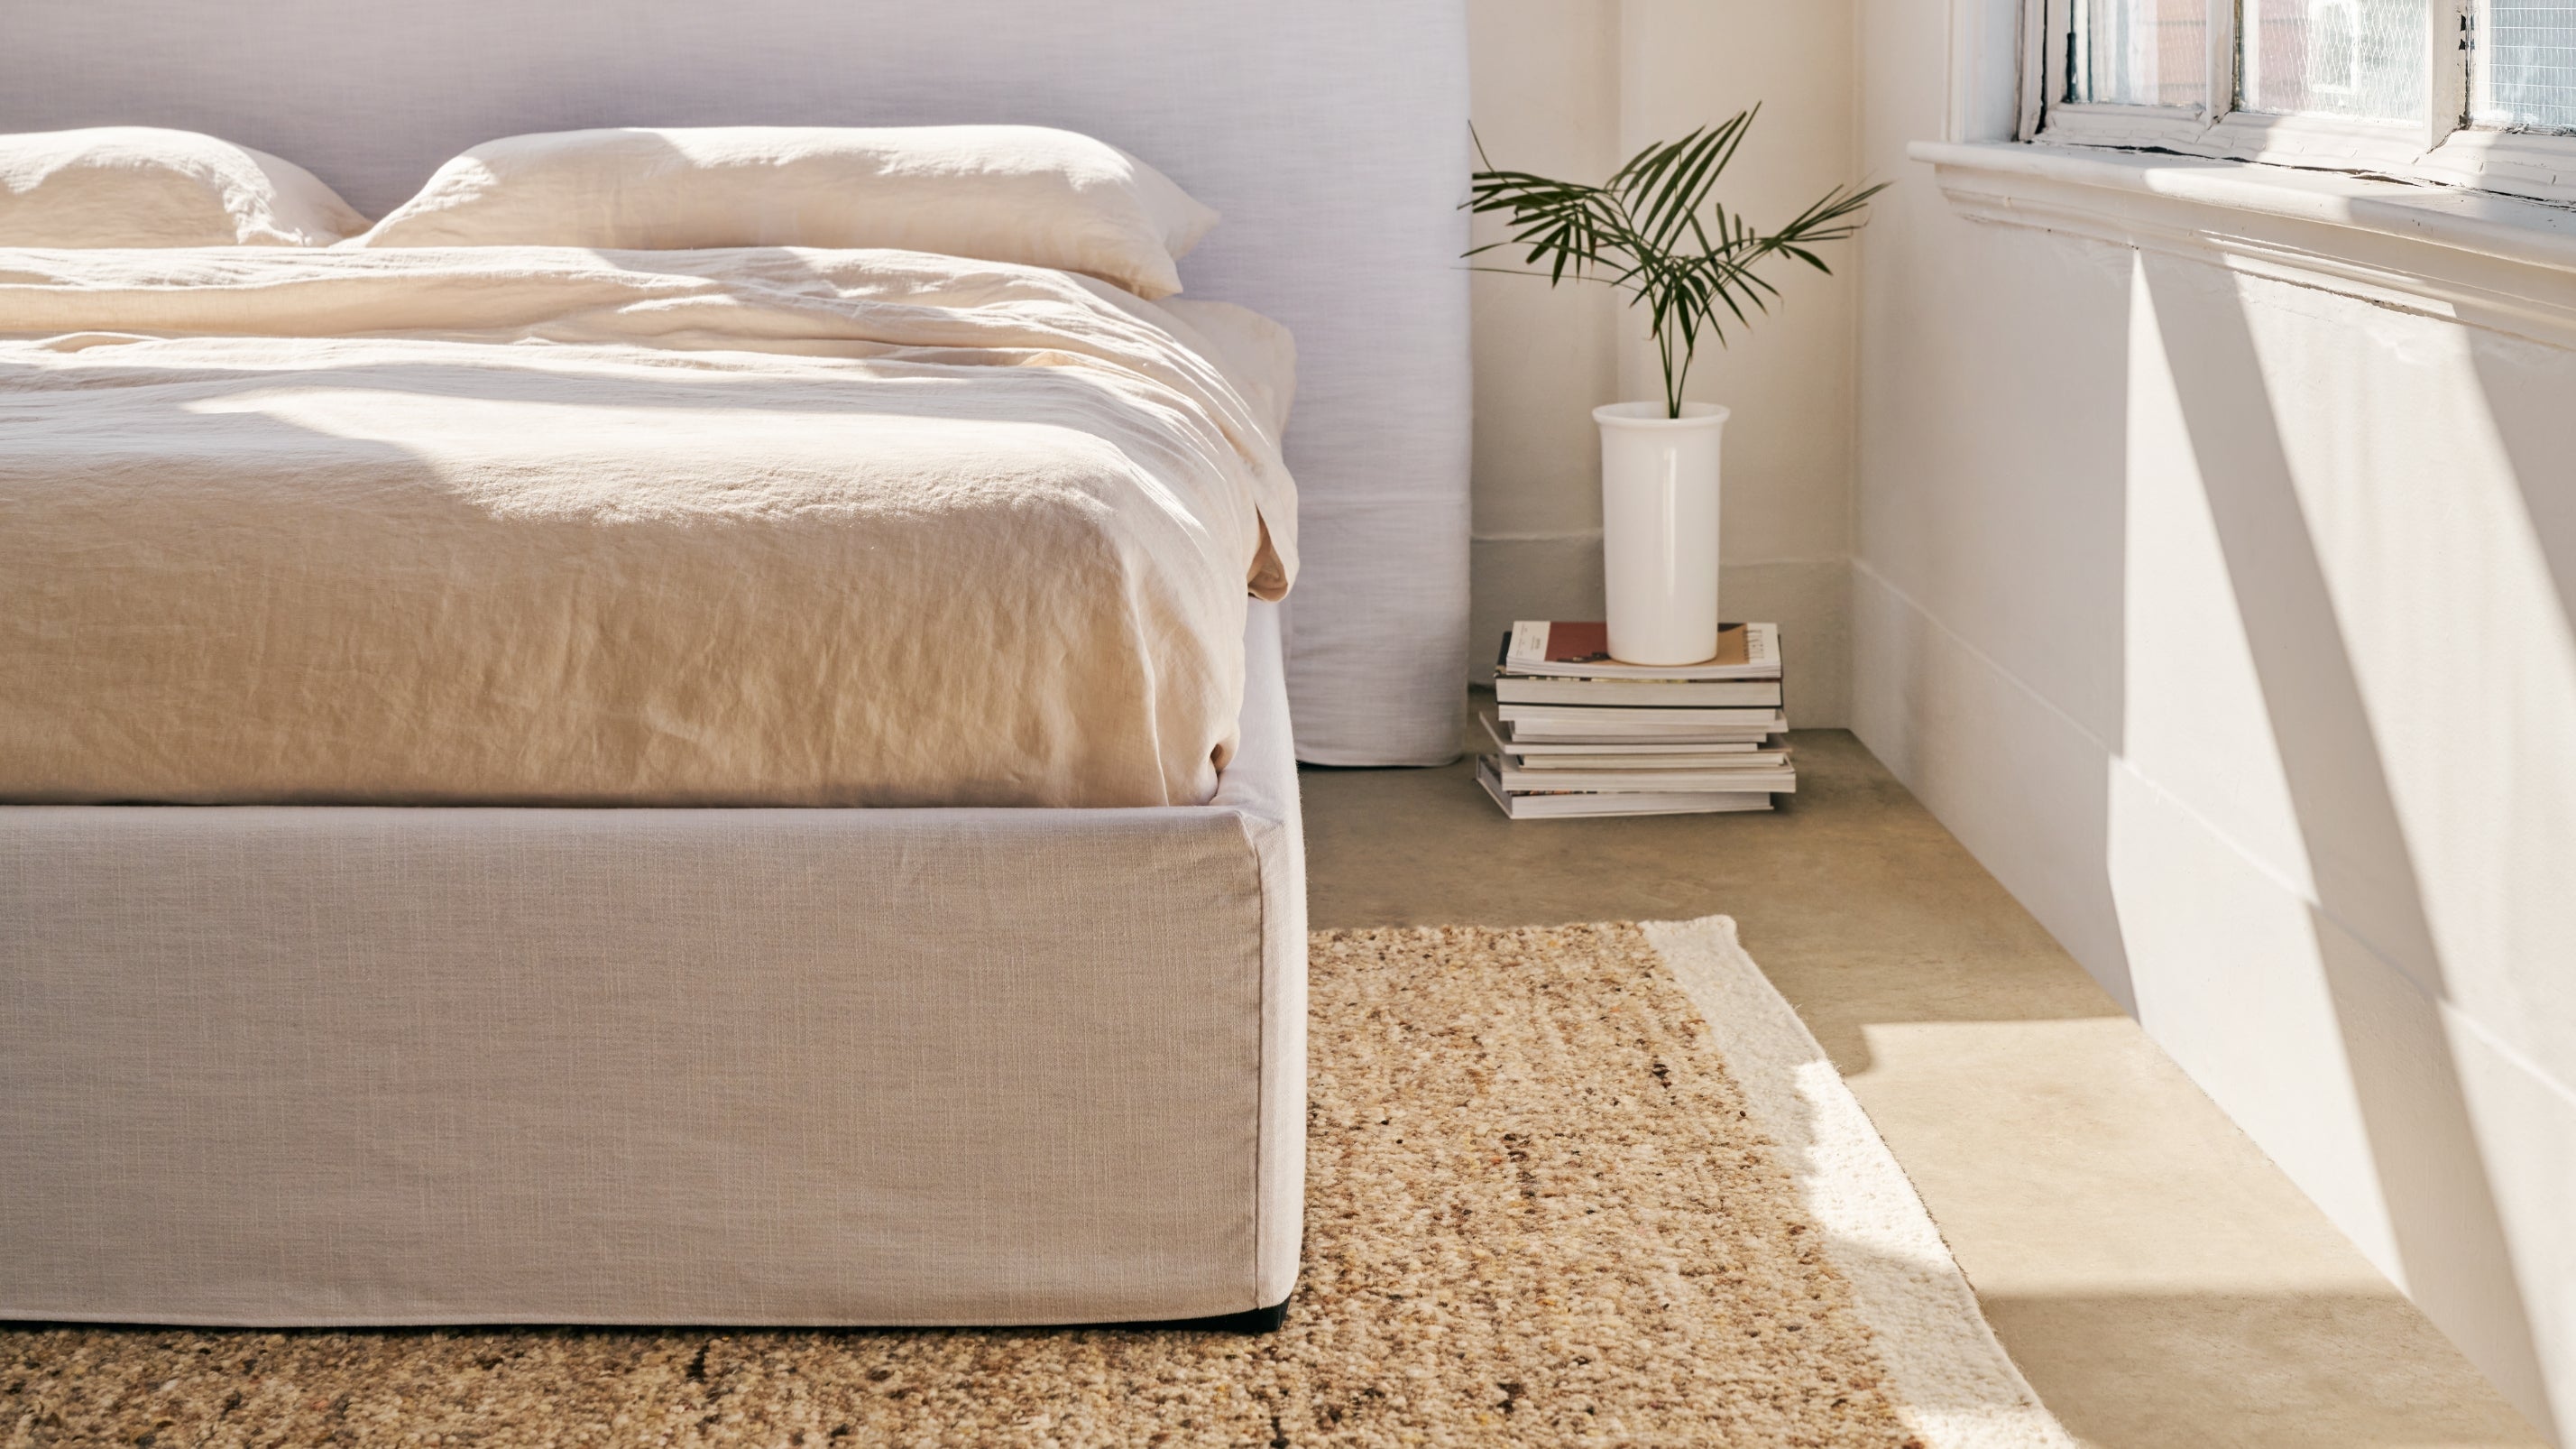 Wave Bed with Storage, King, White - Image 3